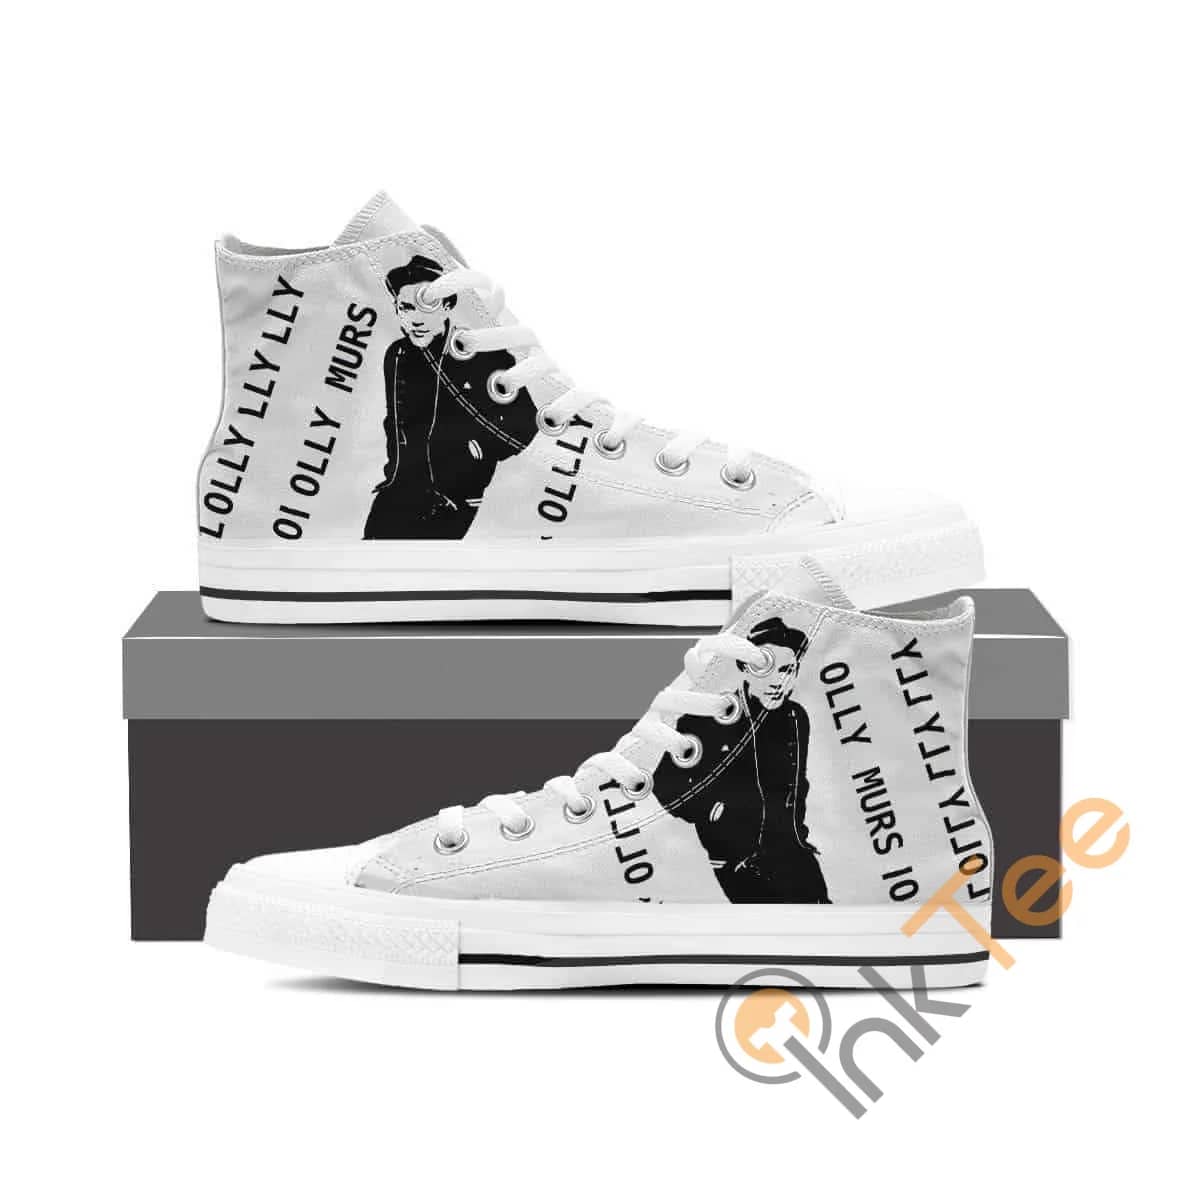 Olly Murs Amazon Best Seller Sku 2095 High Top Shoes